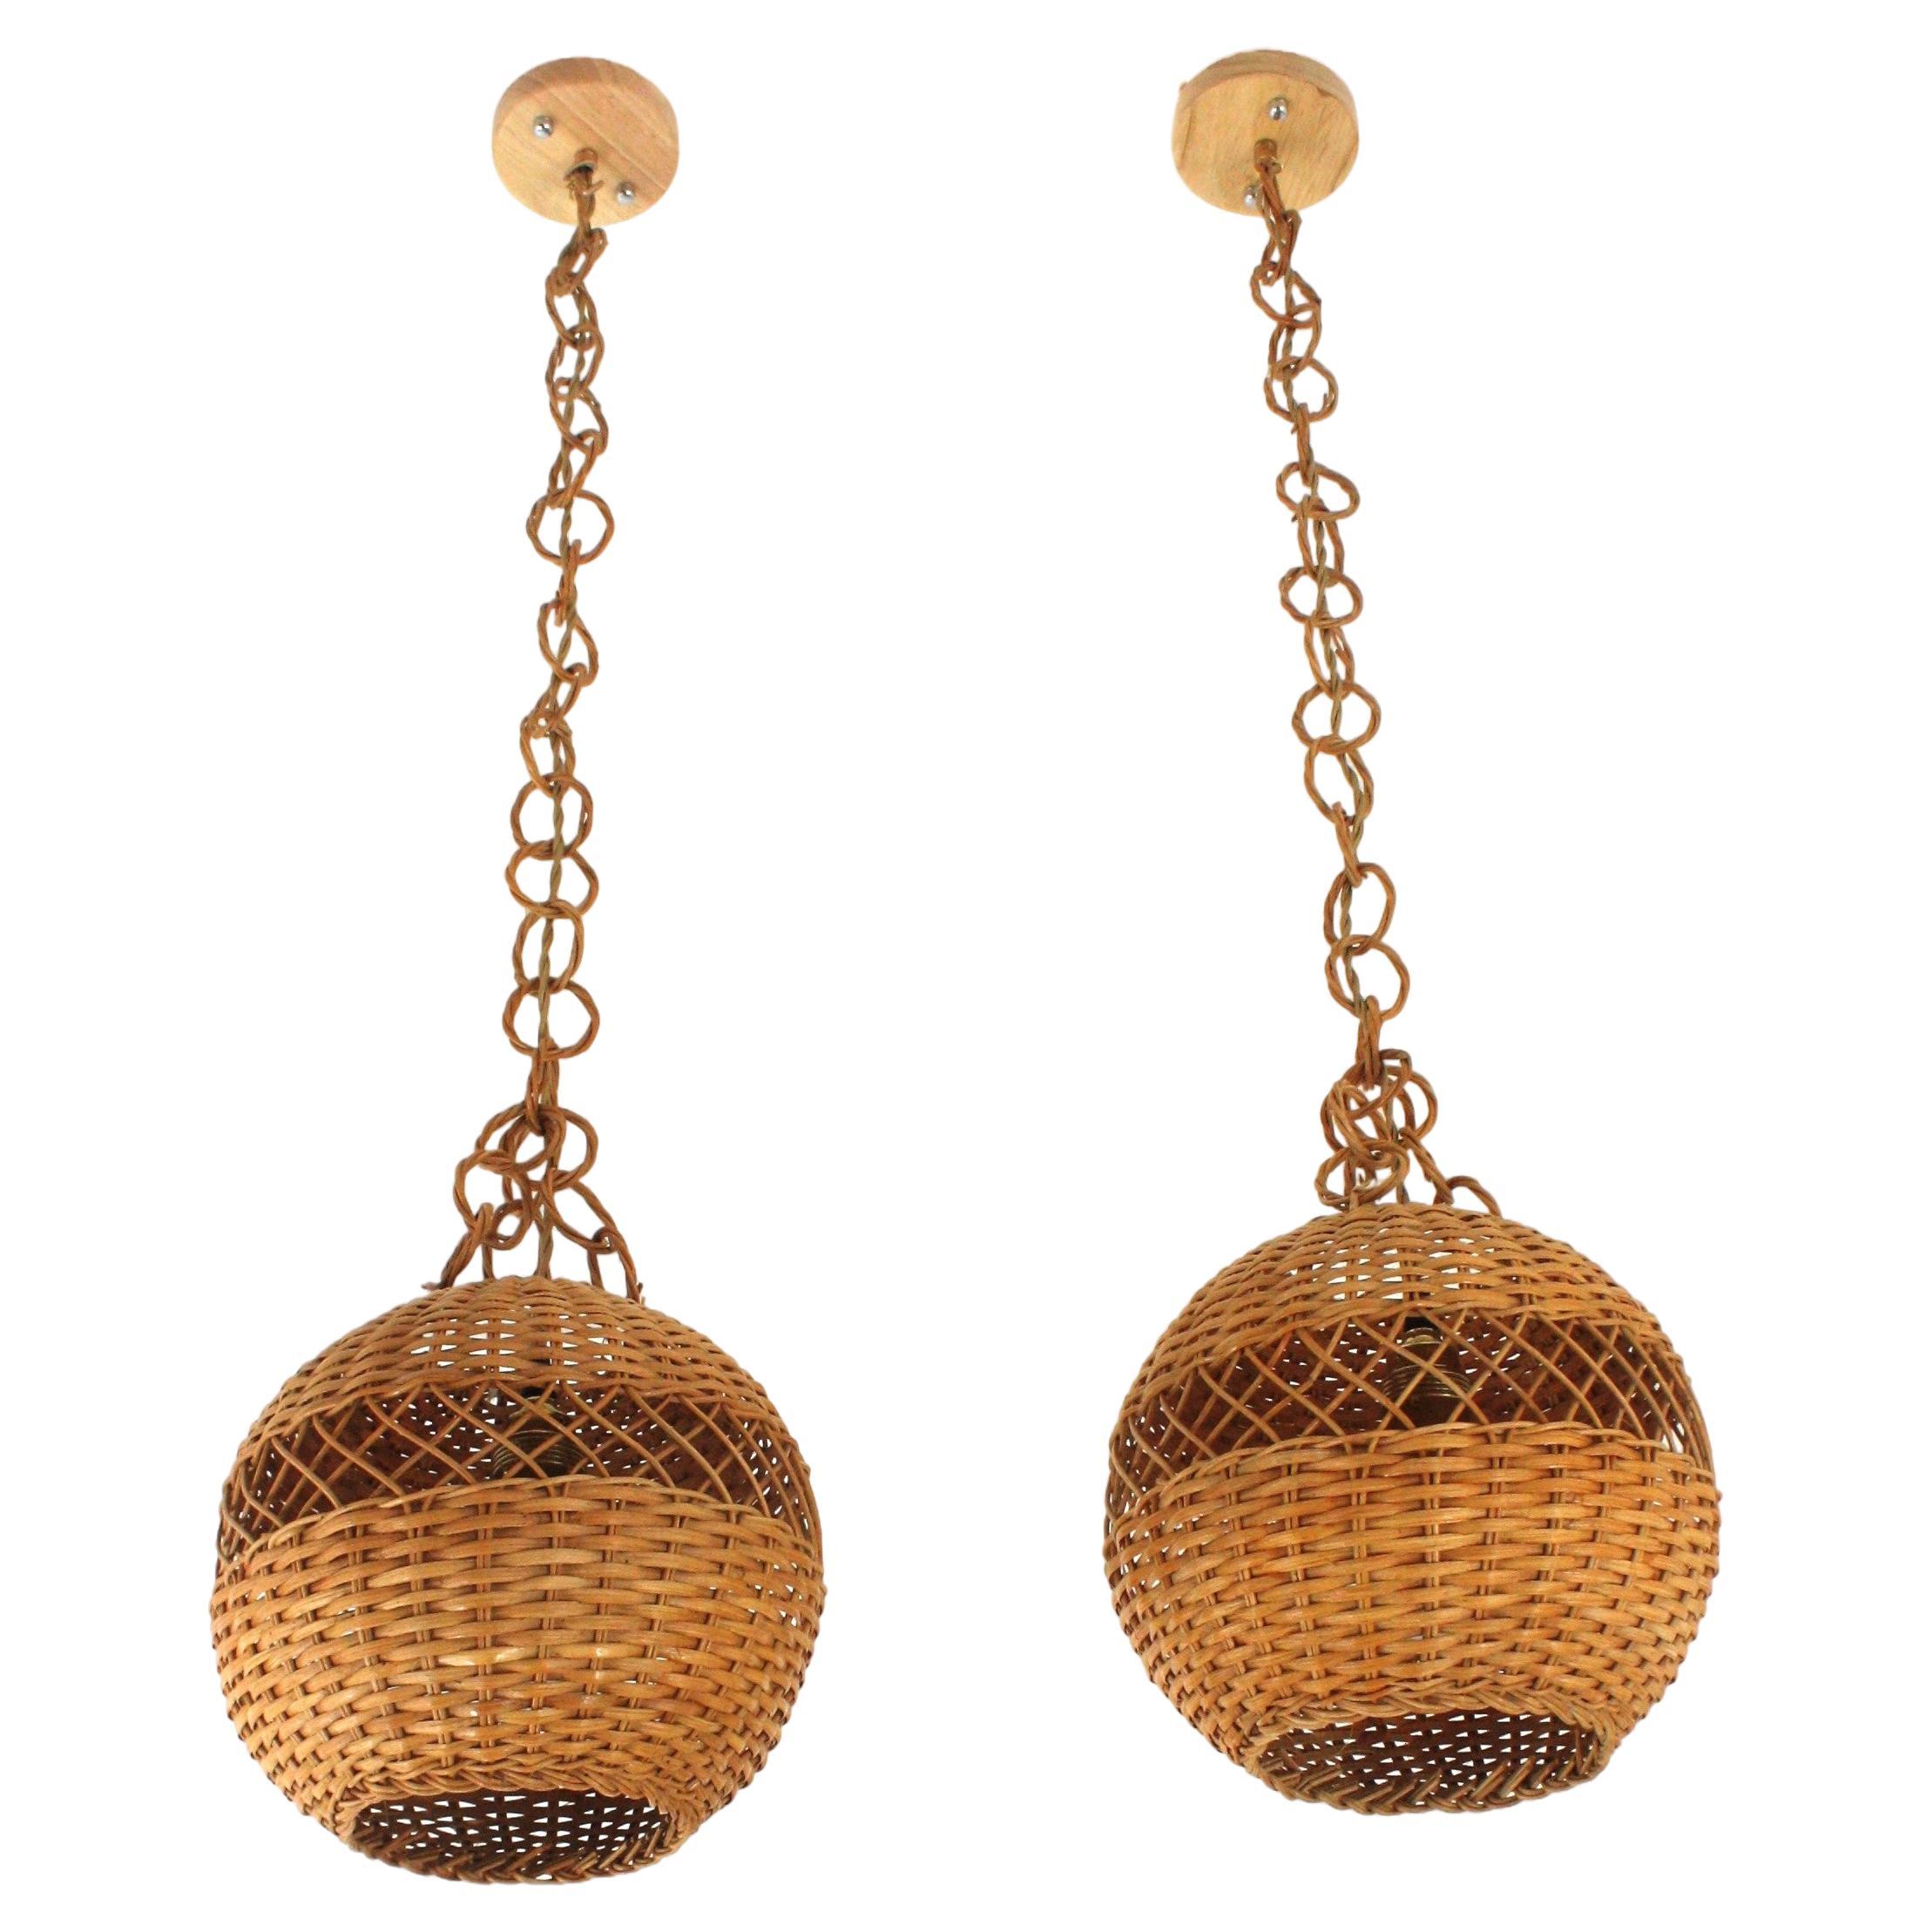 Eye-catching pair of handcrafted braided rattan / wicker pendant hanging lamps. Spain, 1960s.
This beautiful suspension lamps feature a hand-woven wicker globe shaped lampshade. They hang from a chain with braided rattan links ended by a wood